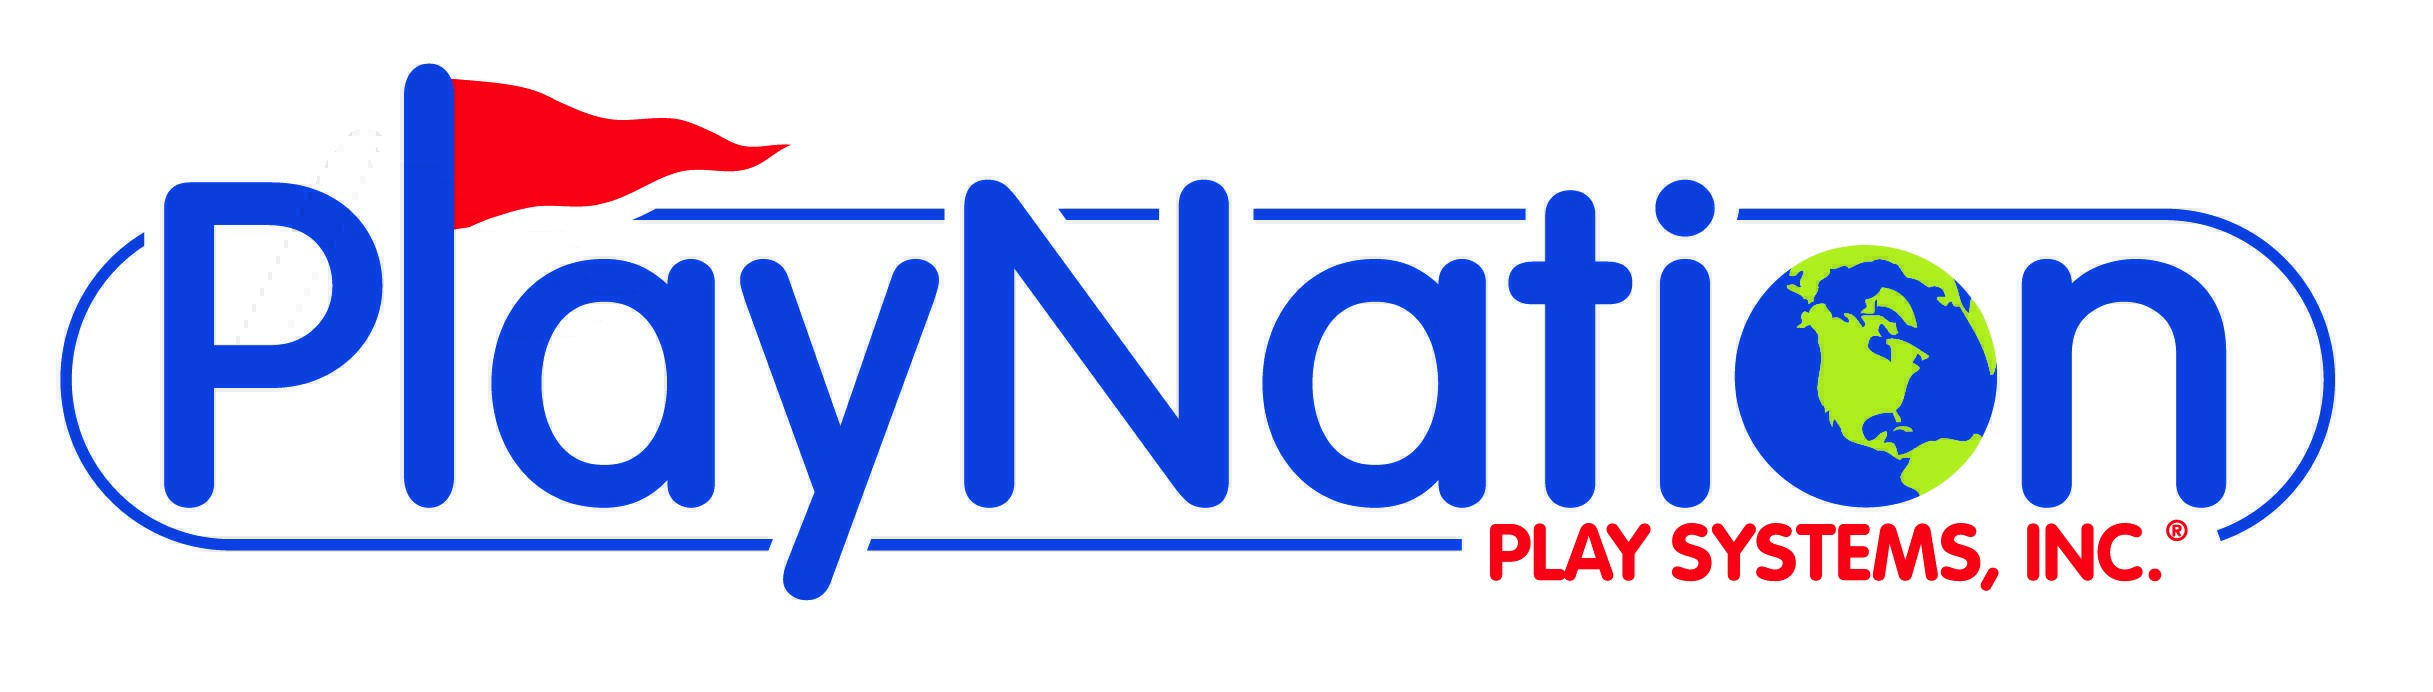 Playnation Play Systems, Inc.